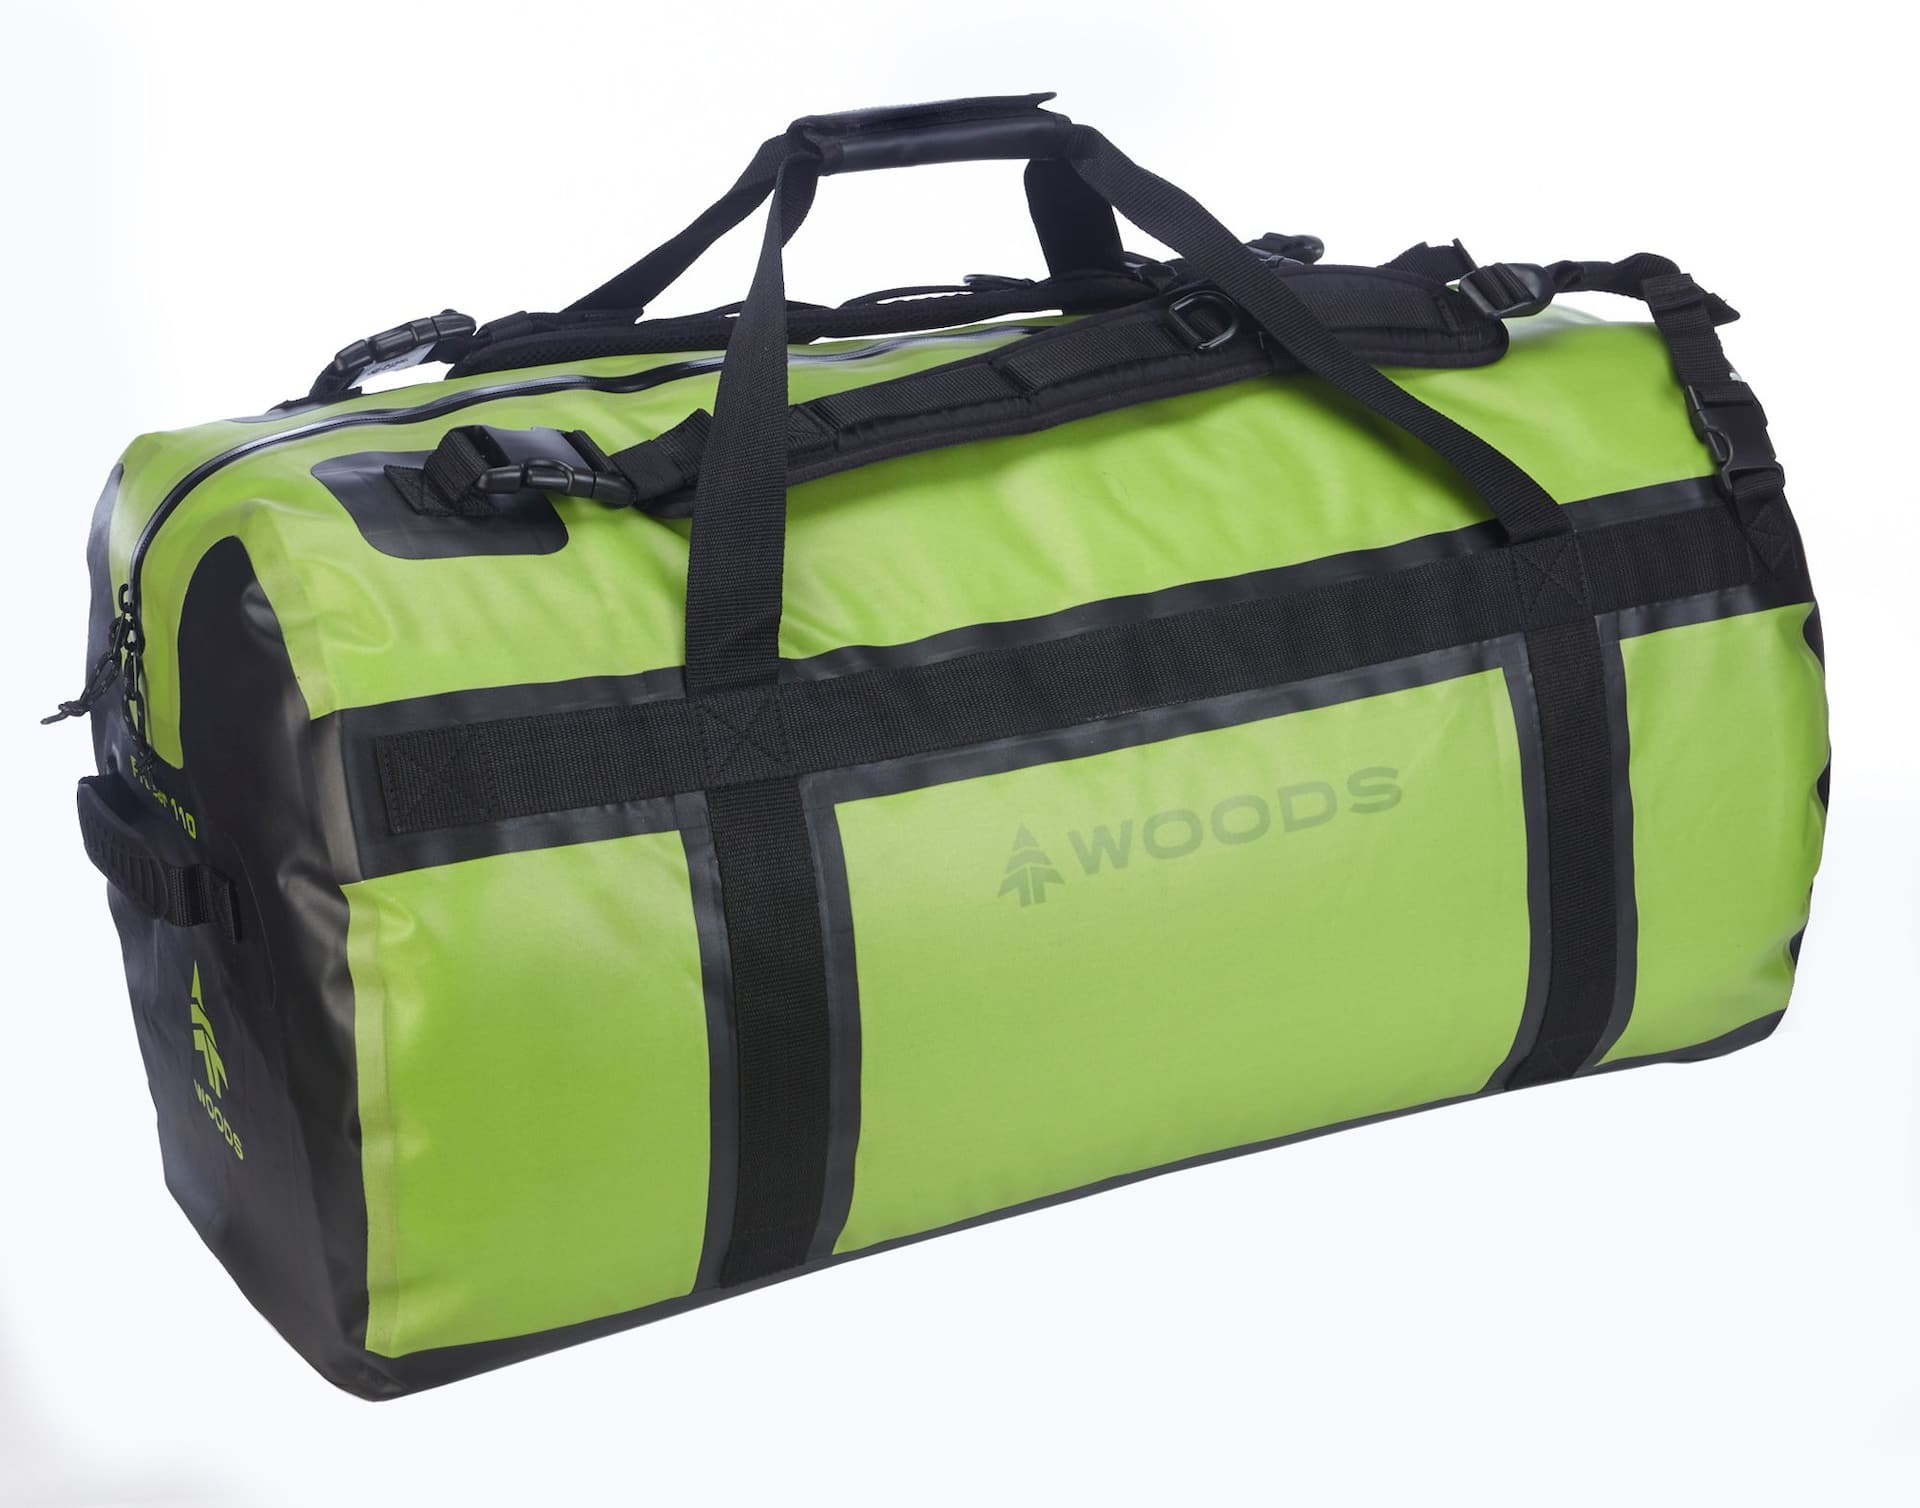 Outbound Self-Packable Weekender Overnight Travel Duffle Bag w/ Padded  Shoulder Strap, 180-L